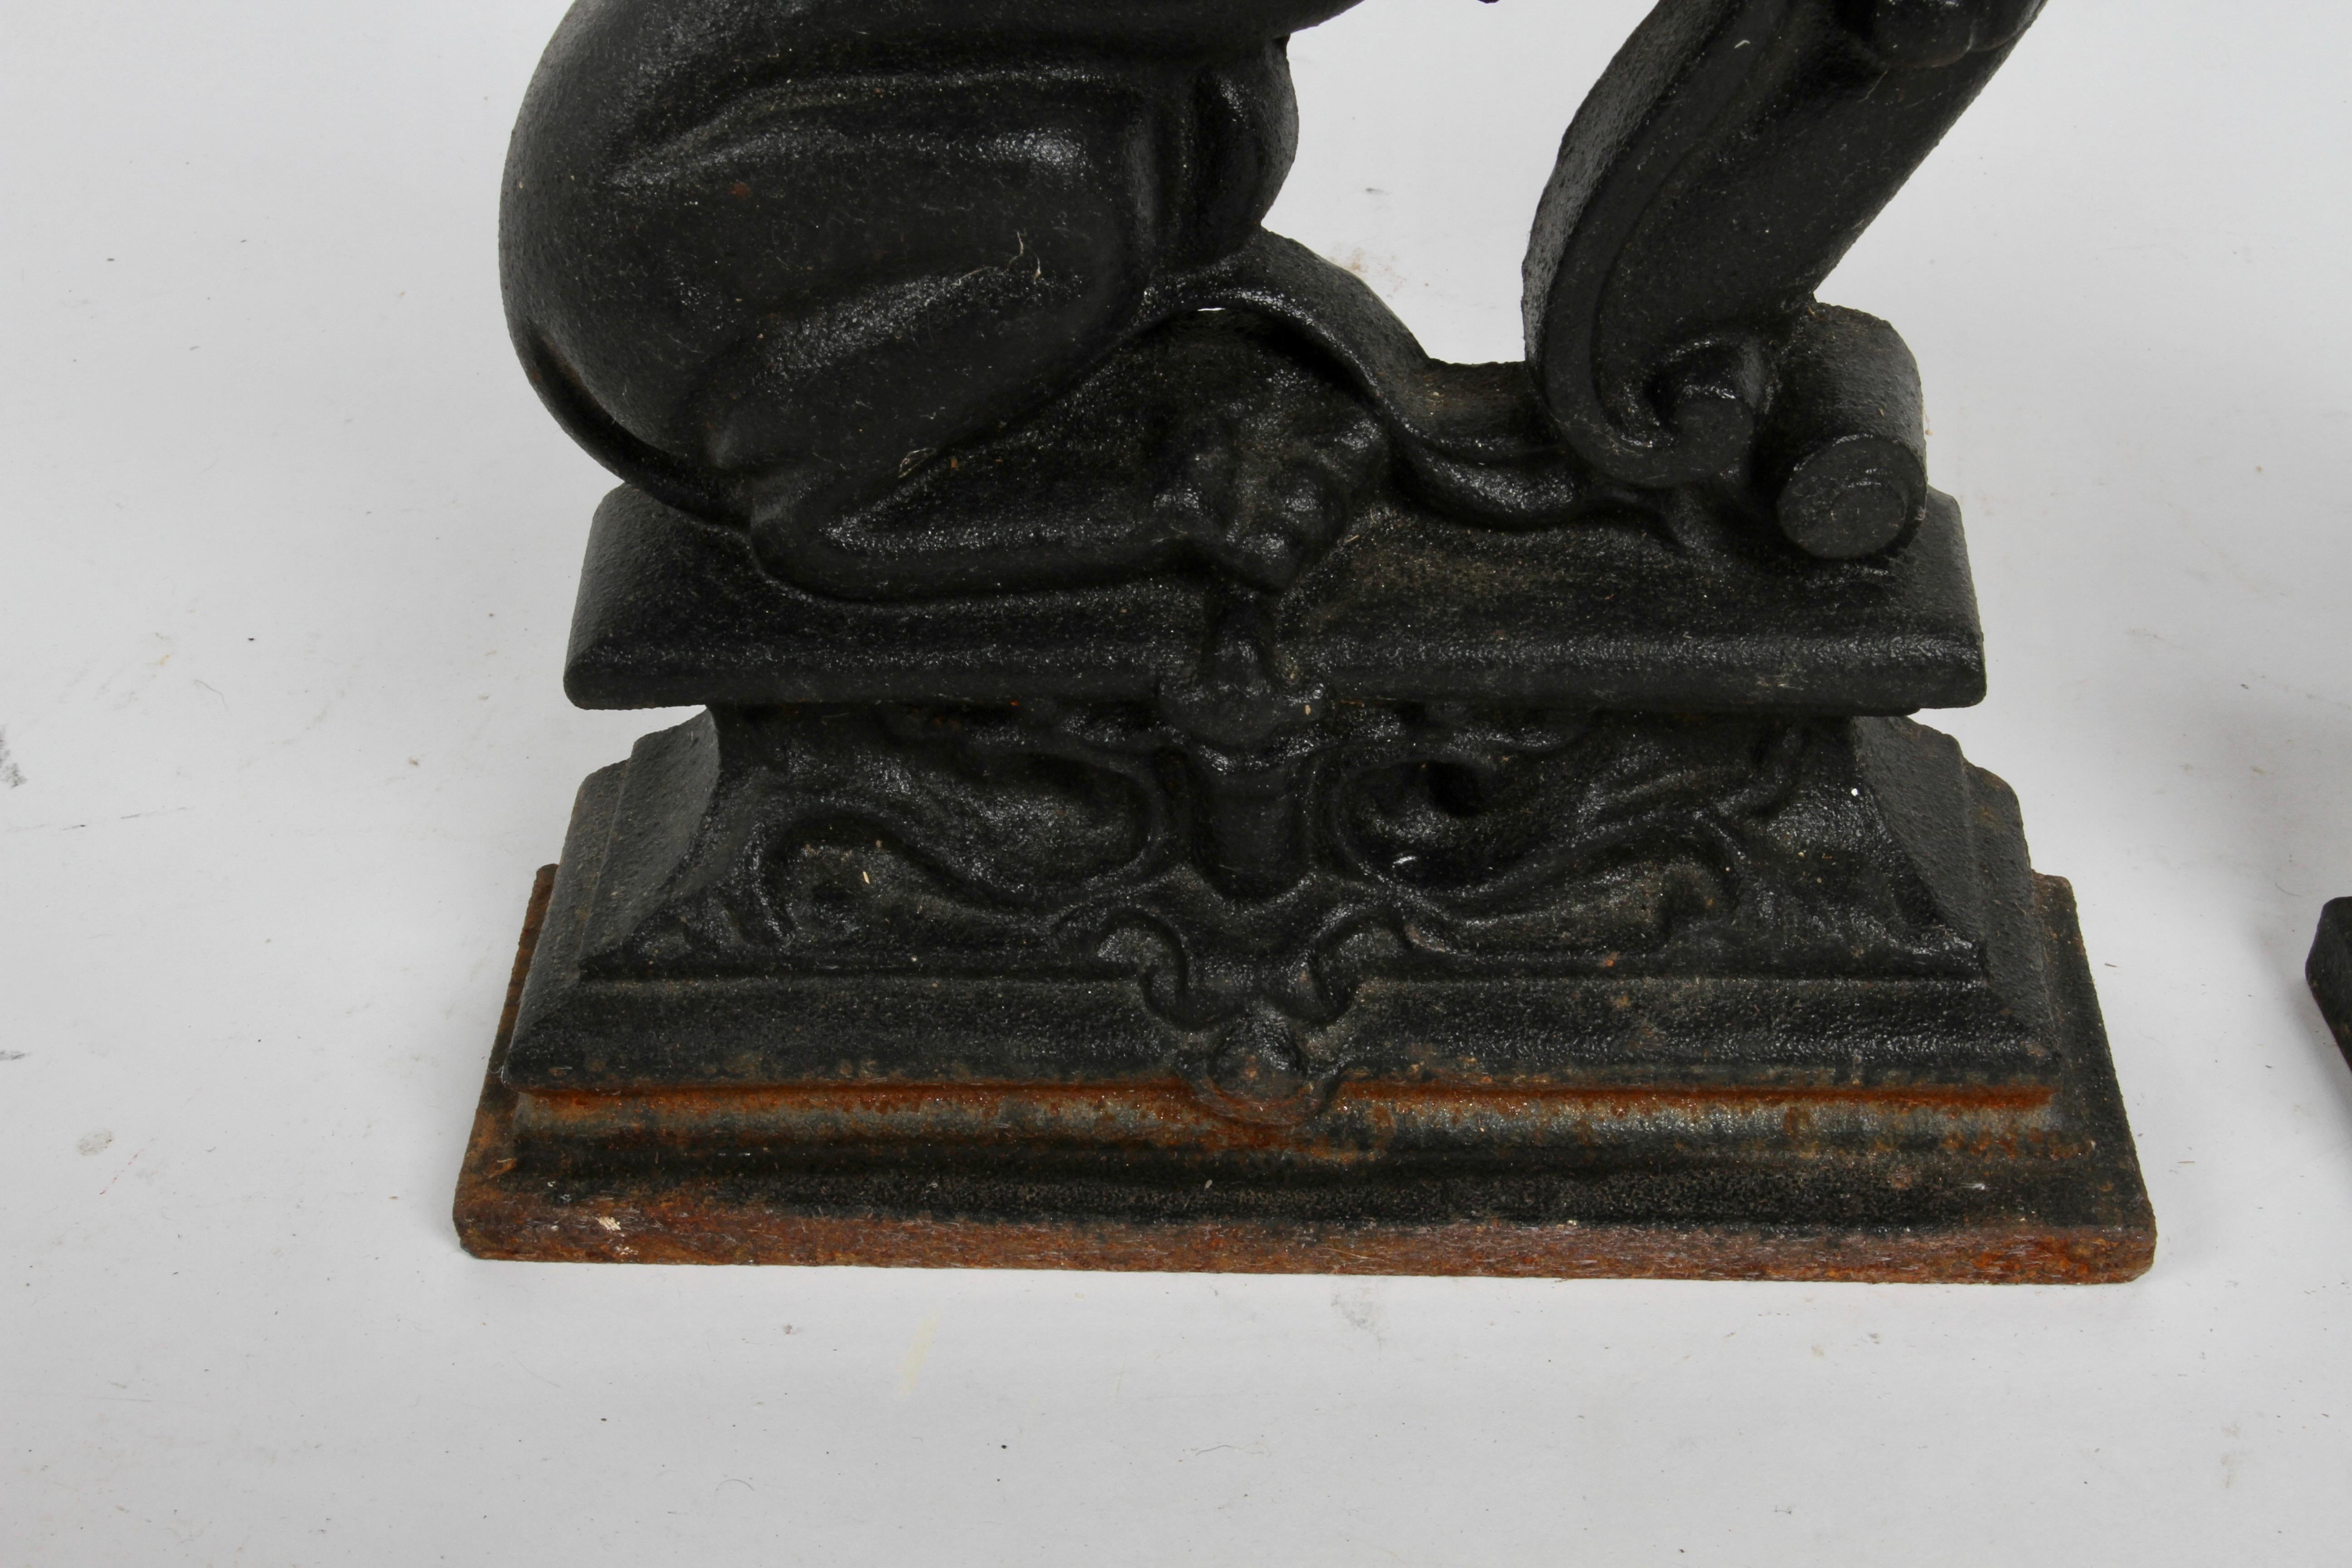 Beaux Arts Pair of Cast Iron Andirons or Fire Dogs of Rampant Lions Resting on Shield